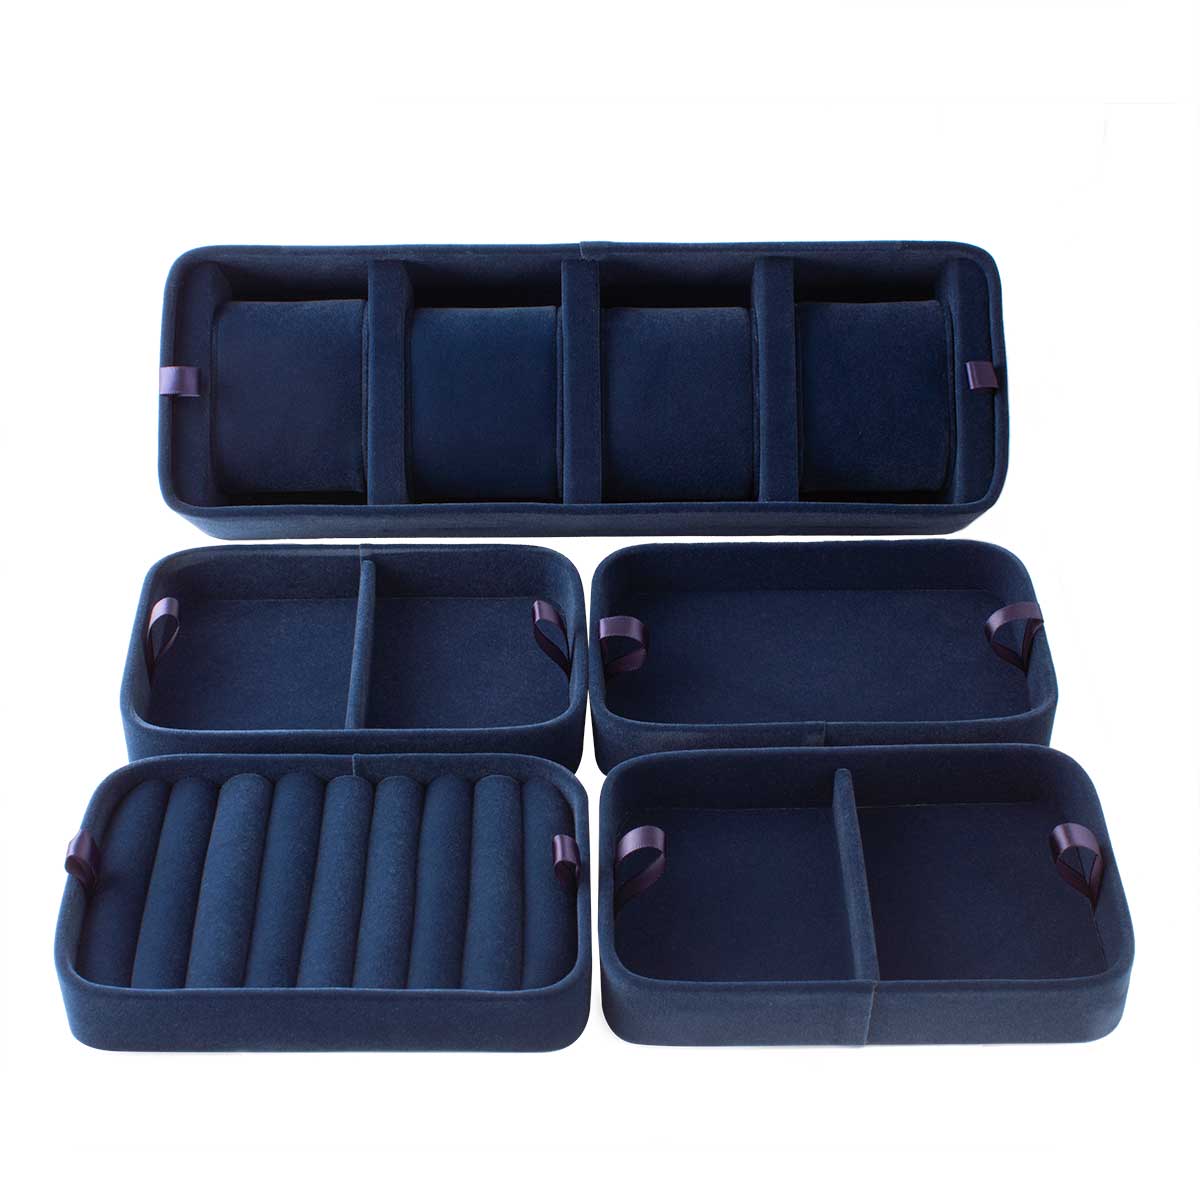 Watch and jewelry box Vendôme - Travel case for 4 watches - Blue, black